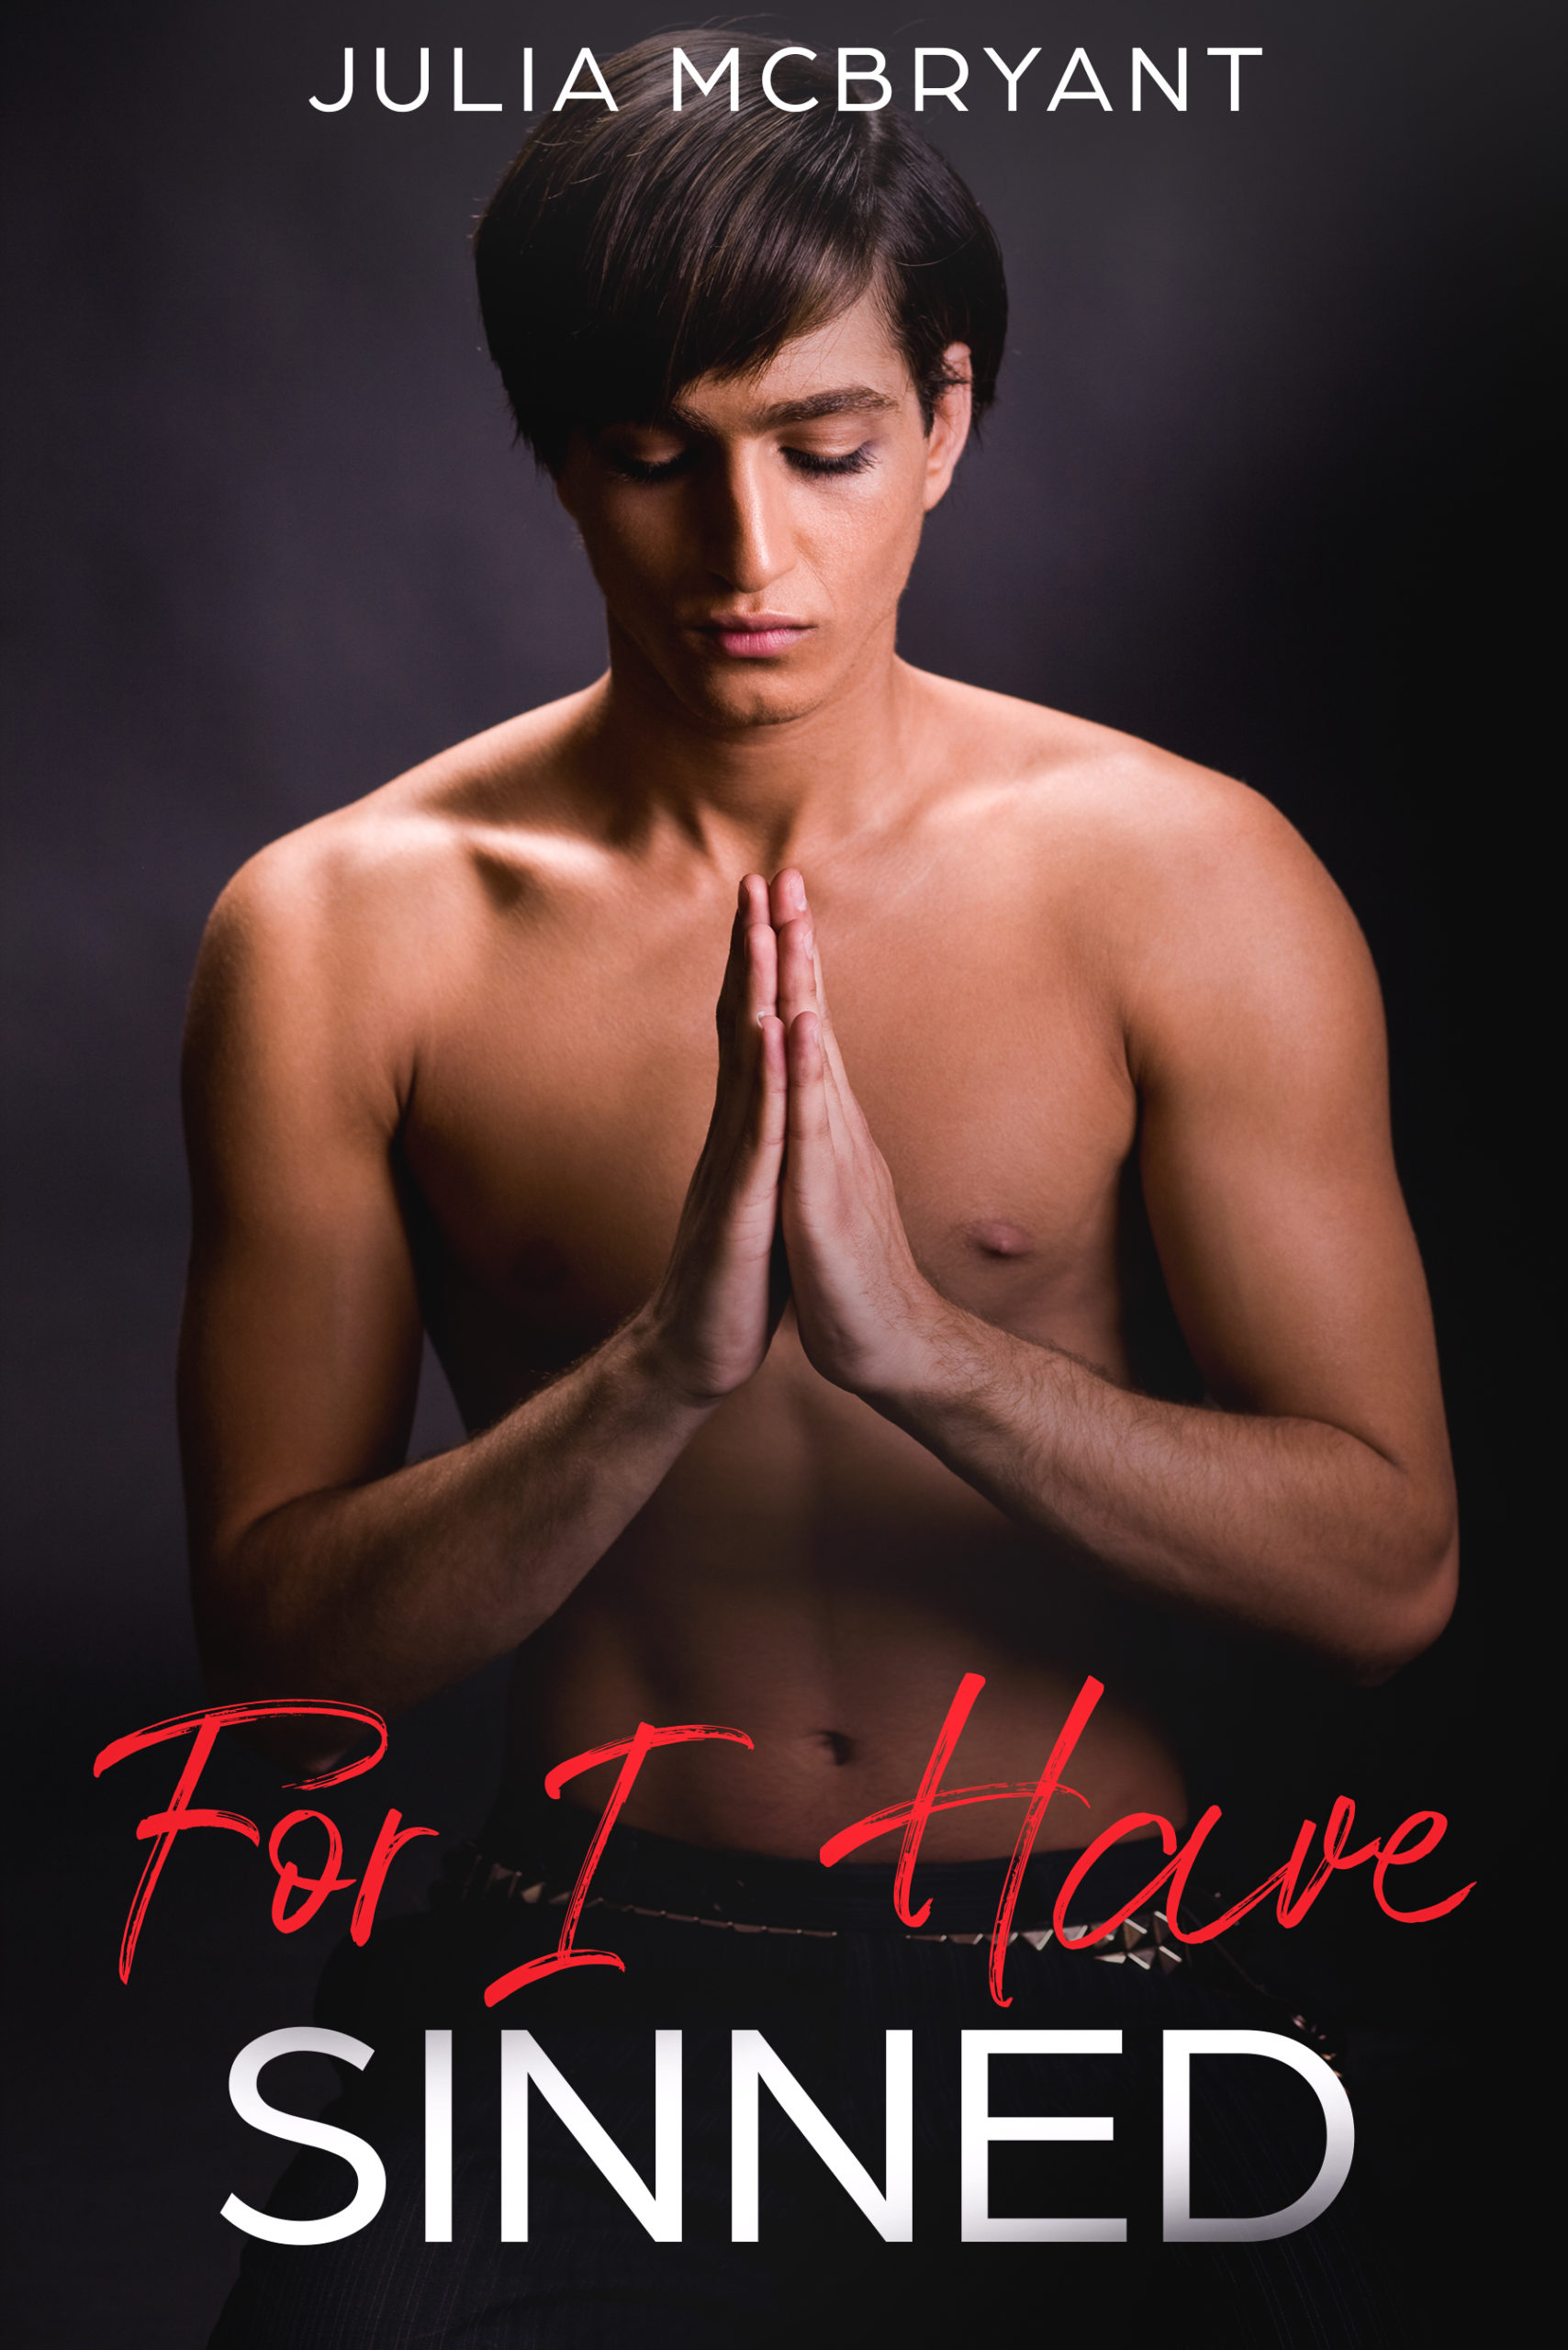 For I Have Sinned by Julia McBryant